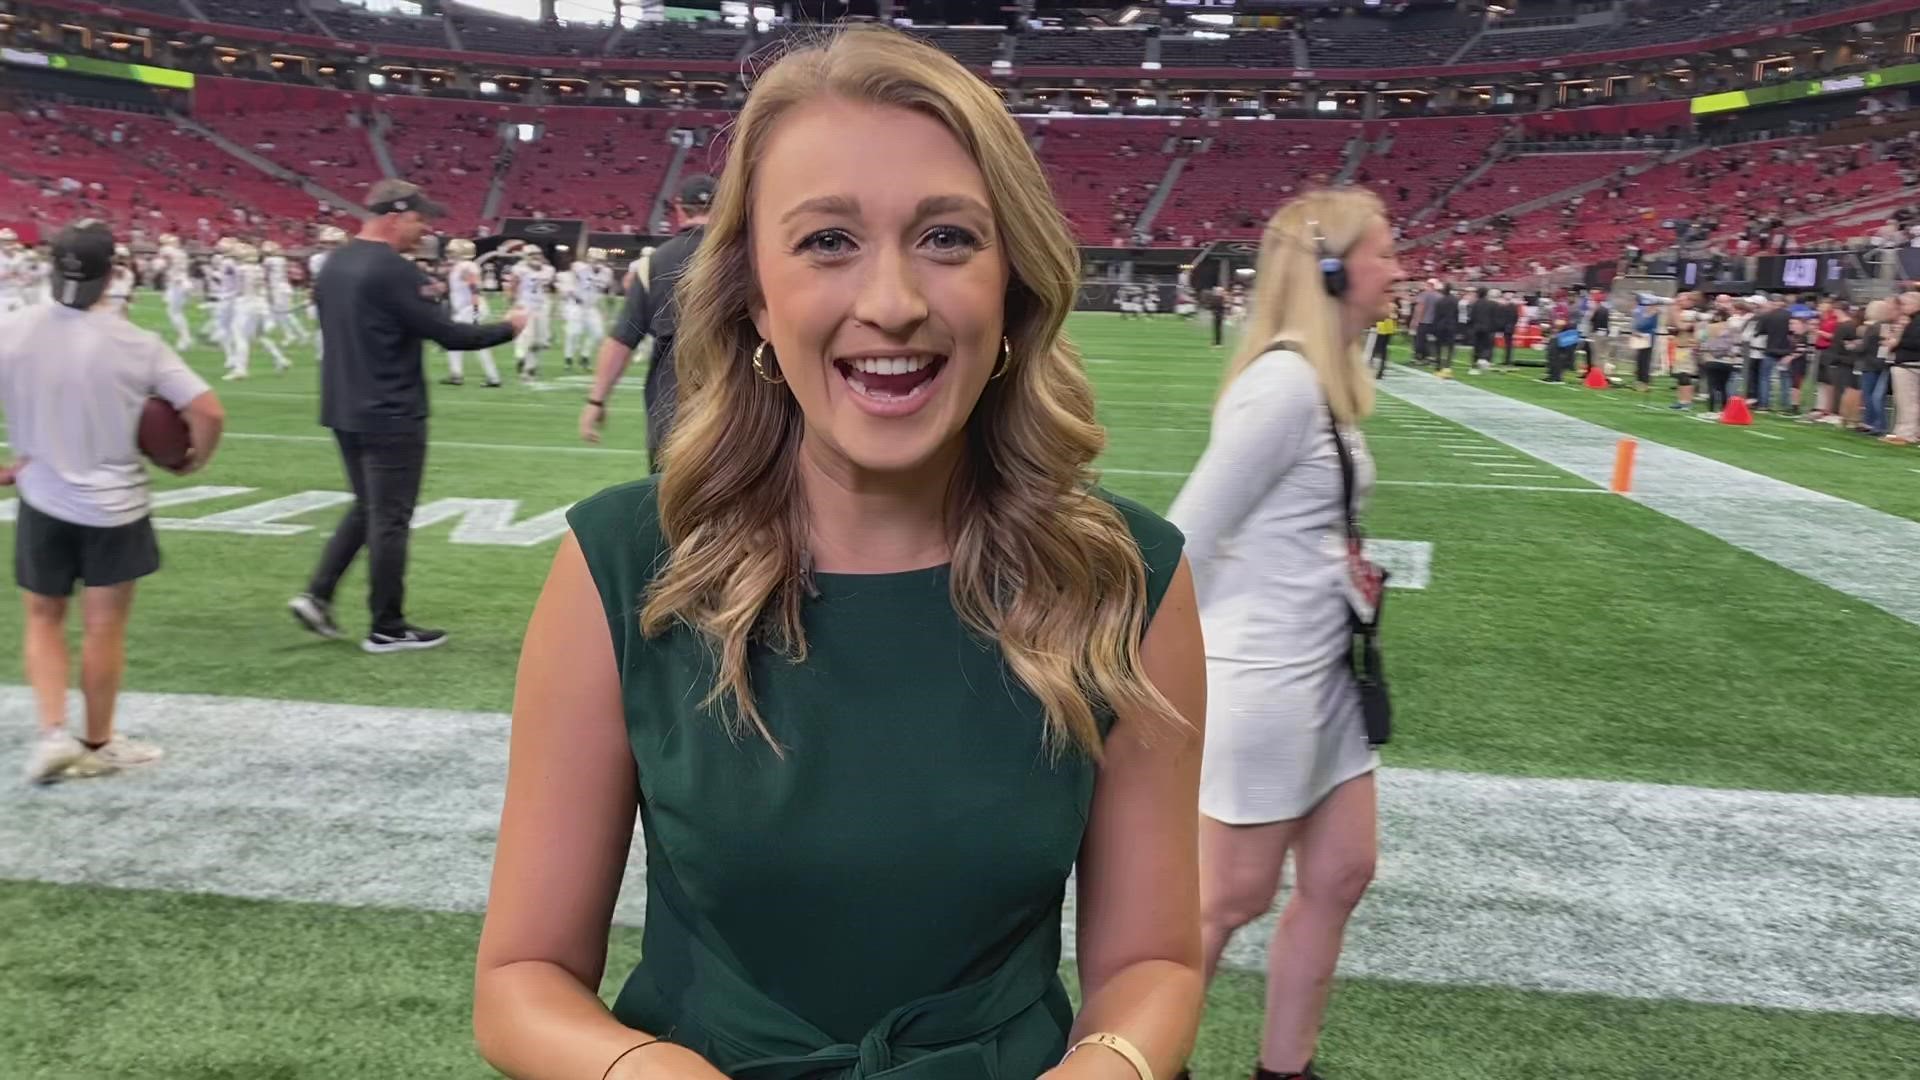 WWL-TV's Brooke Kirchhofer previews the Saints' week 1 matchup against the Falcons.